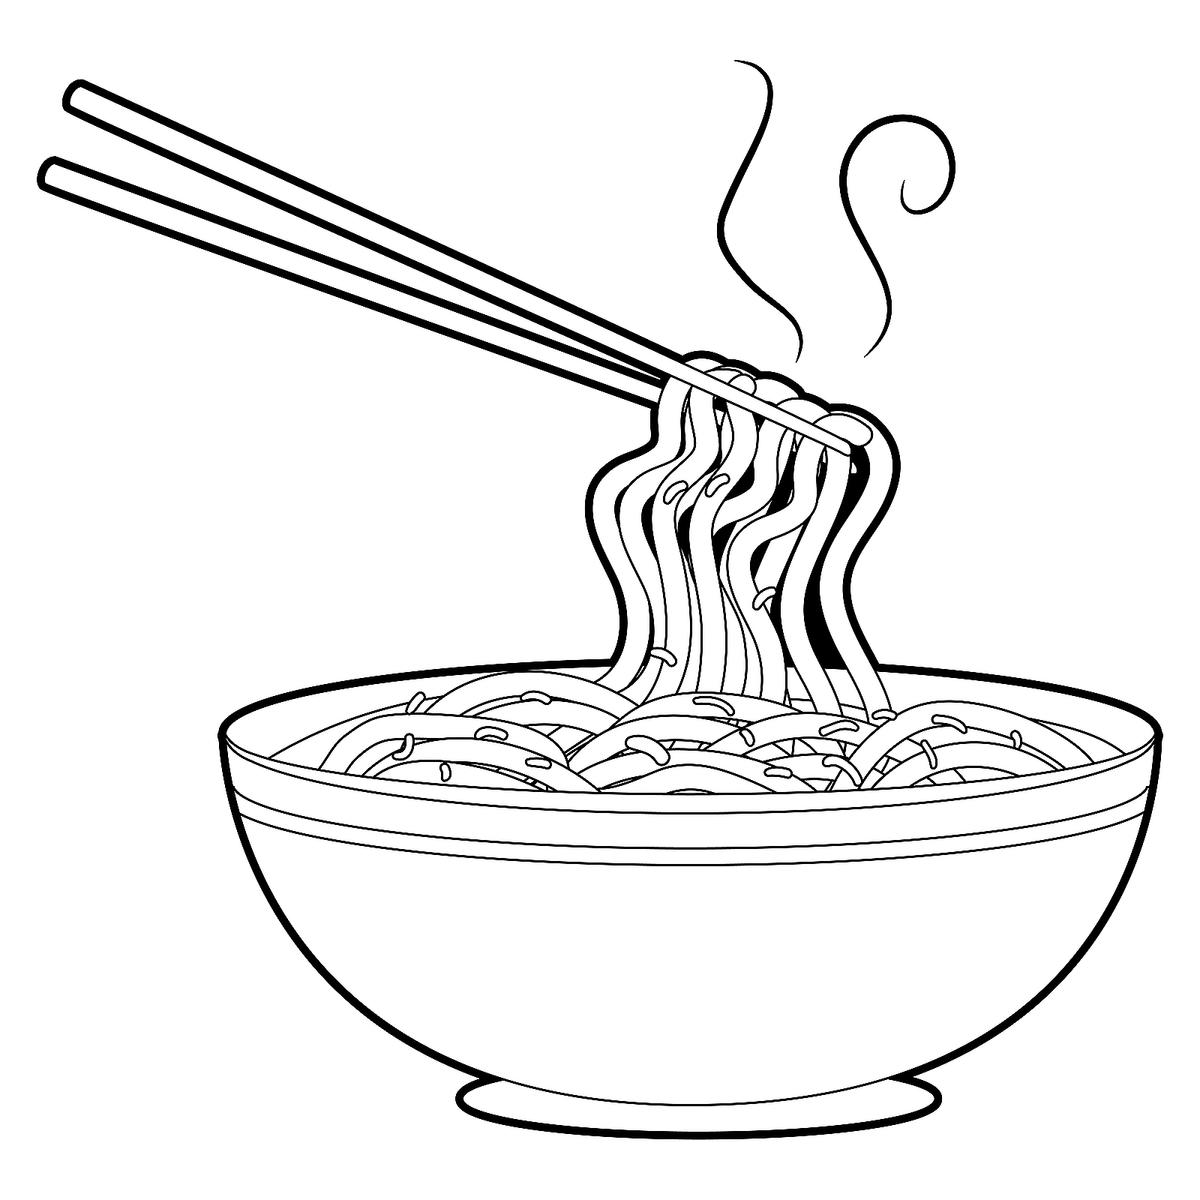 Food Coloring Pages 20 Free Printable Coloring Pages Of Food That ...